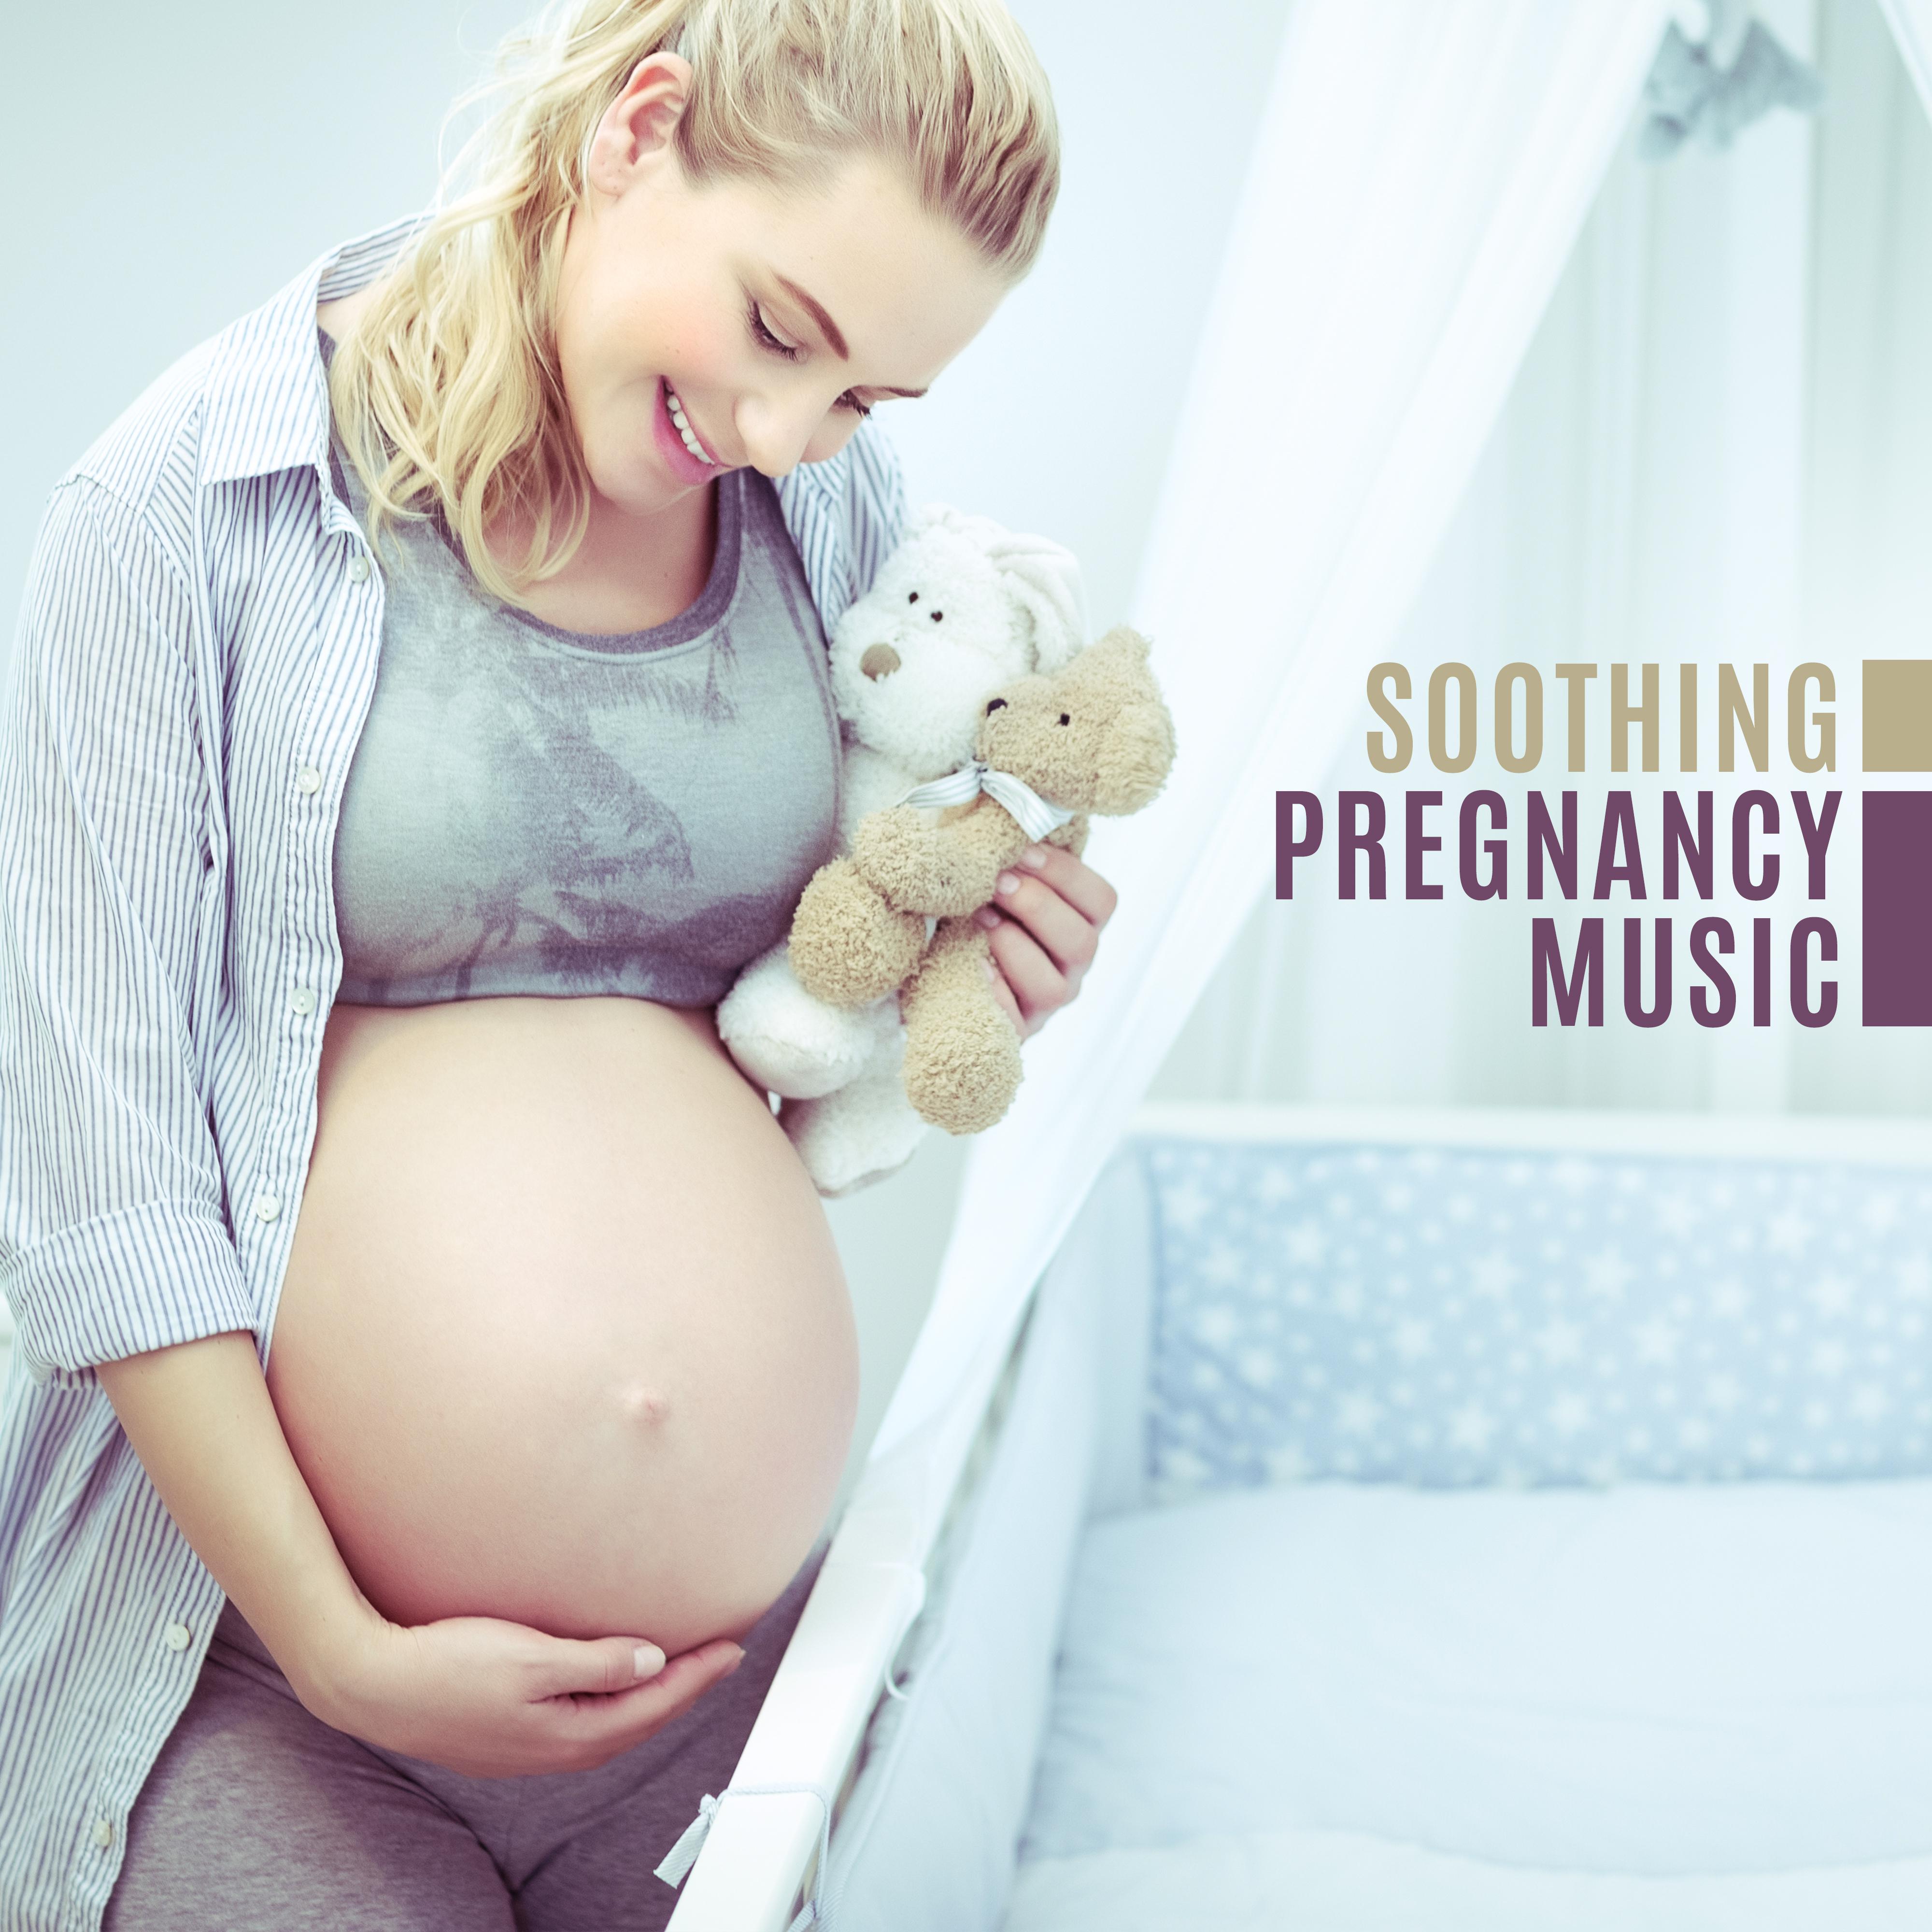 Soothing Pregnancy Music – Calming Music for Relaxation, Deeper Sleep, Stress Relief, Deep Meditation, Music for Future Mom